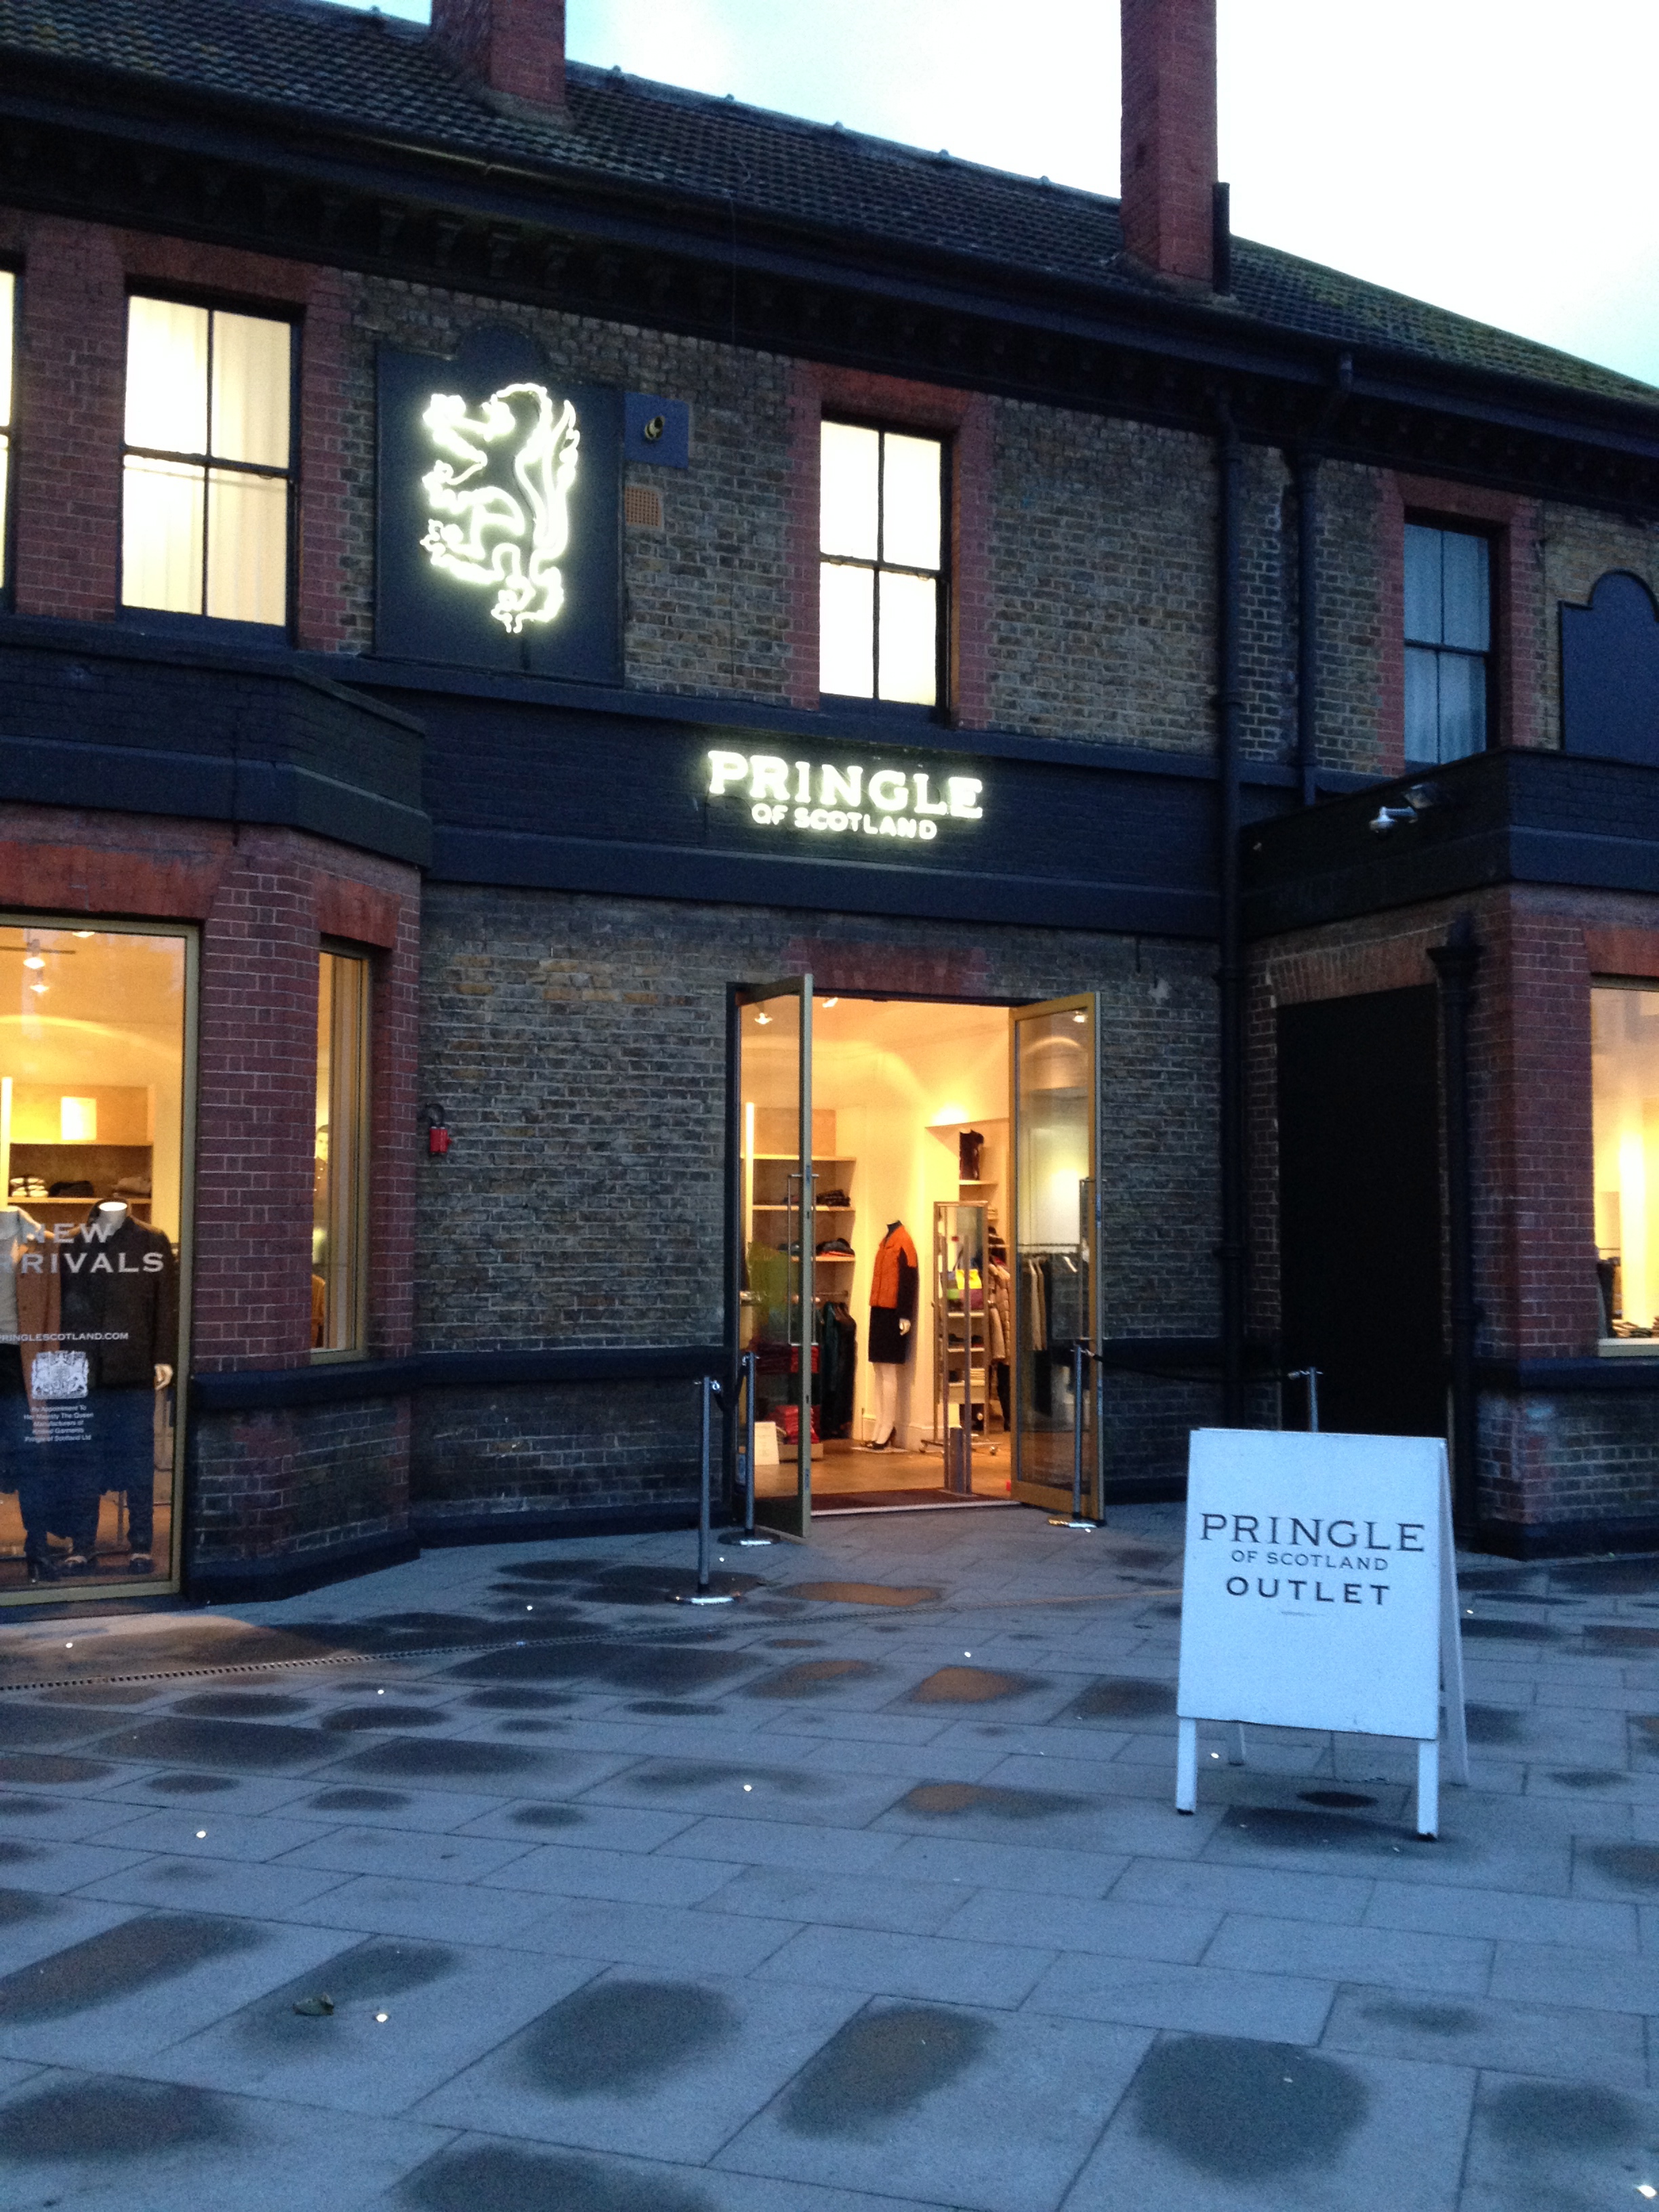 burberry outlet london prices